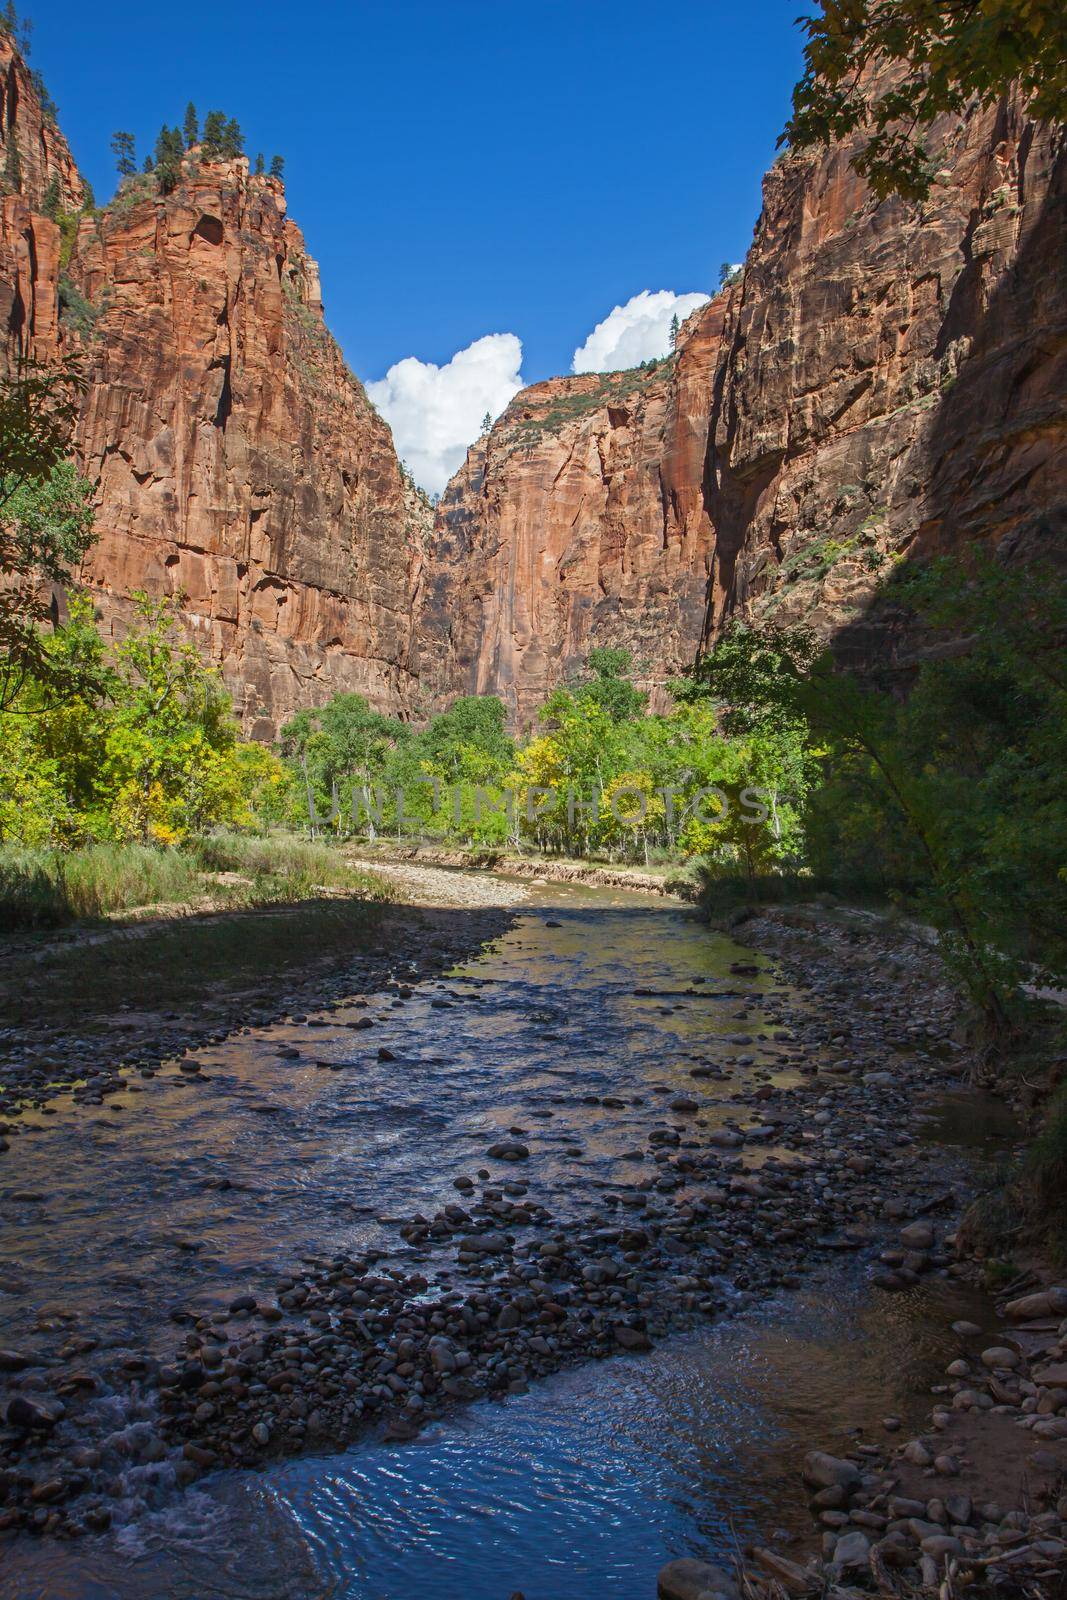 Virgin River Zion National Park 2611 by kobus_peche